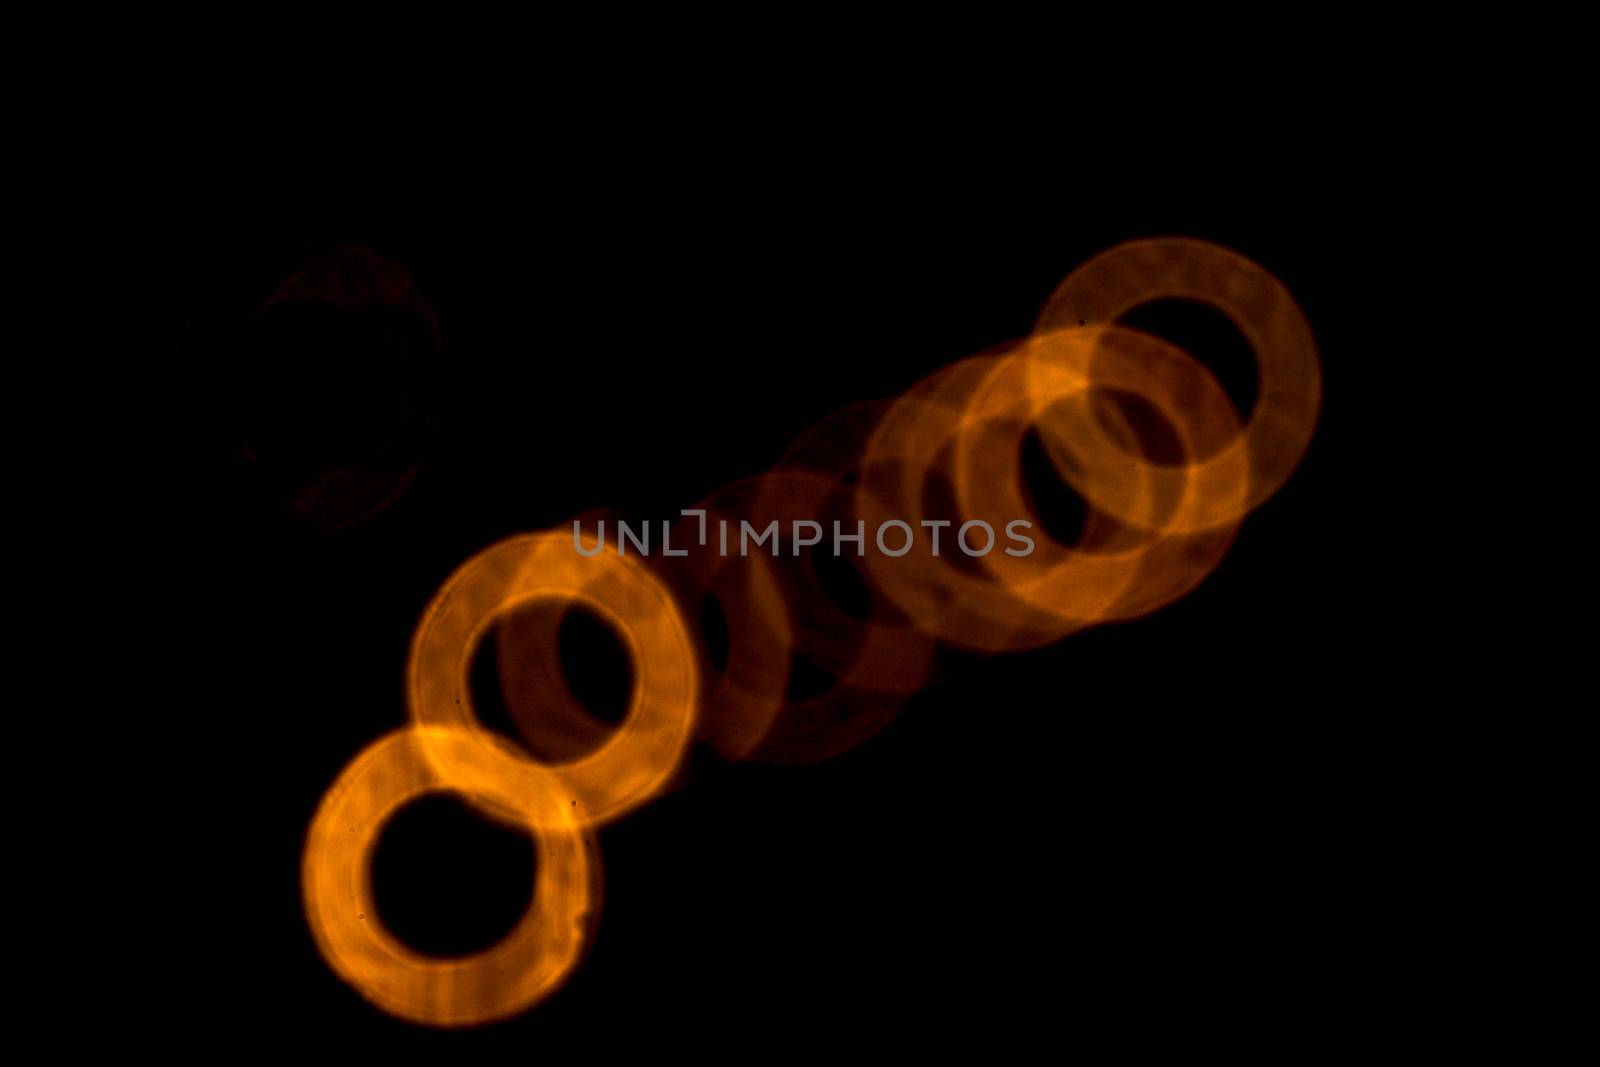 yellow lights on a black background abstraction by darksoul72